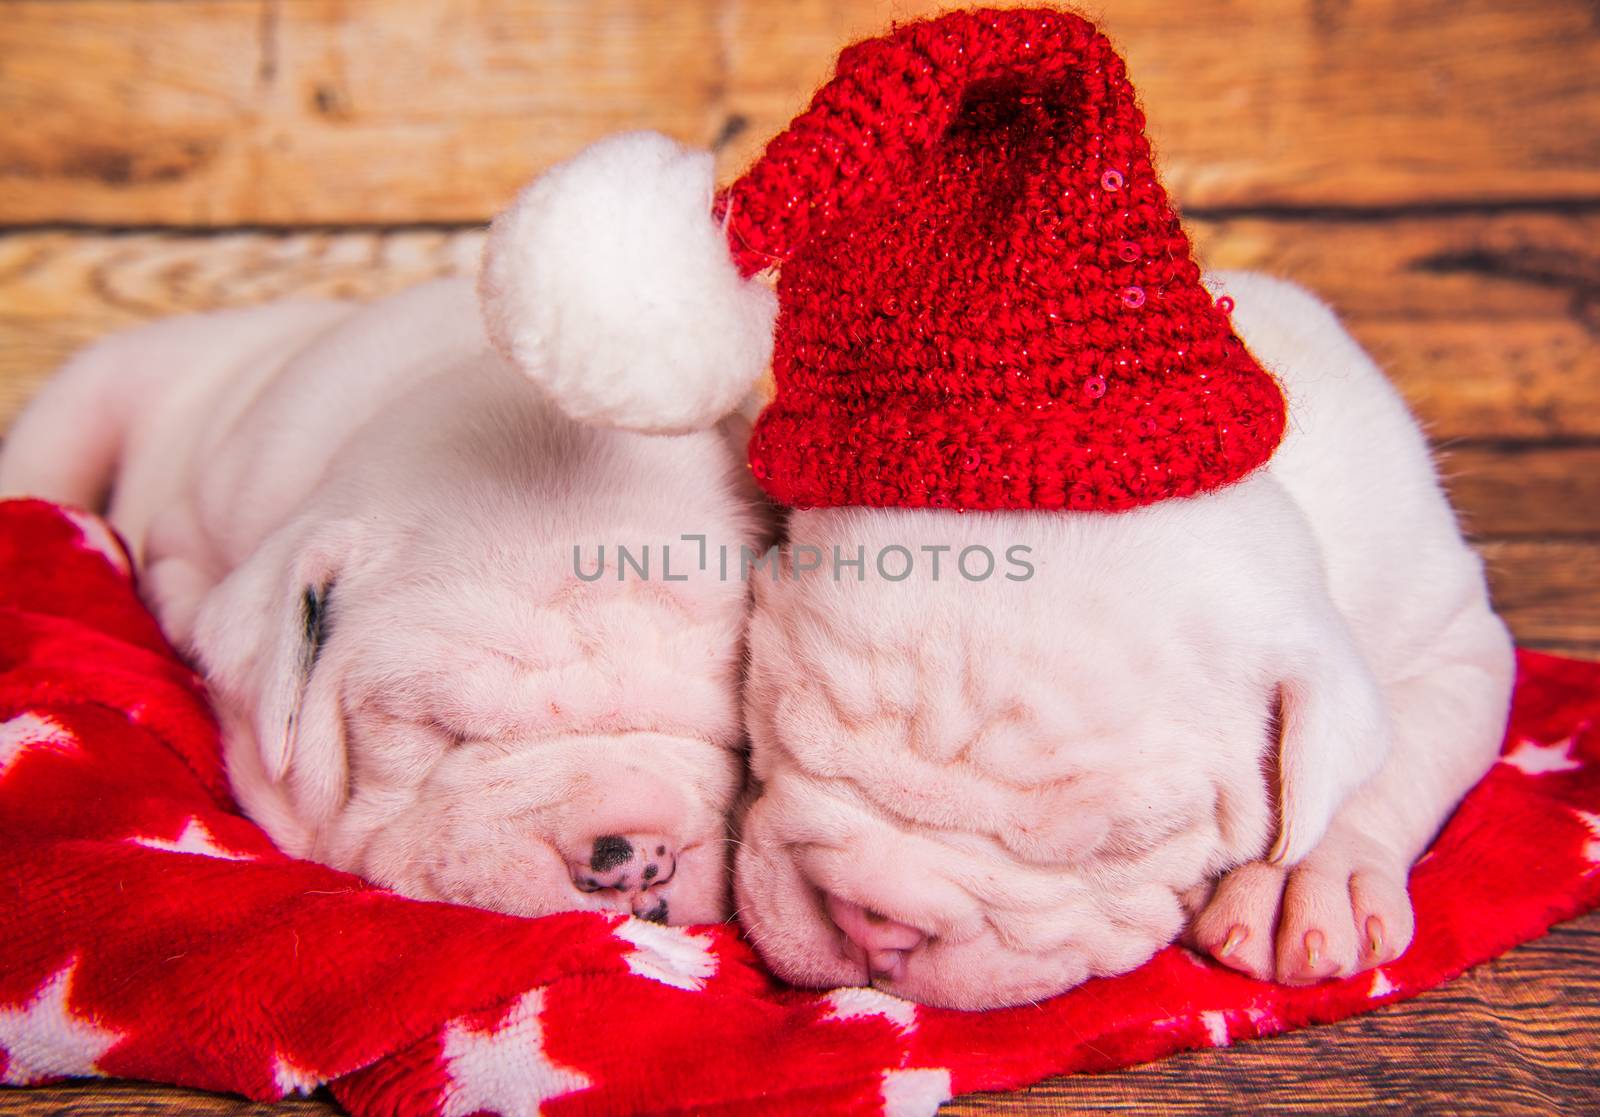 Two Funny American Bulldog puppies dogs with santa claus hat are sleeping. Christmas or New Year background